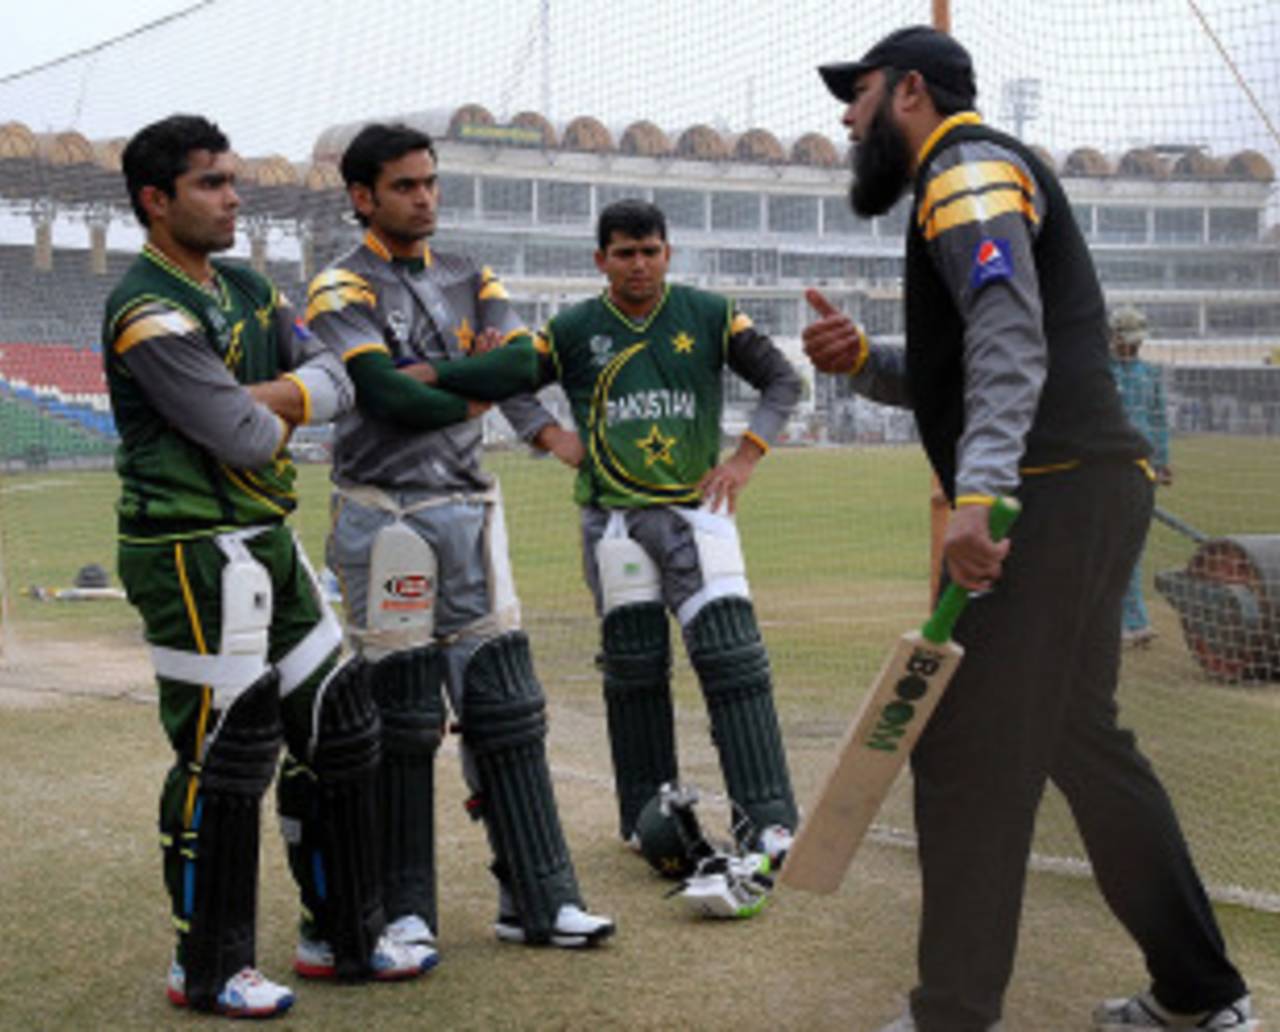 New batting consultant Inzamam-ul-Haq guides Pakistan team members in a training camp, Lahore, December 15, 2012